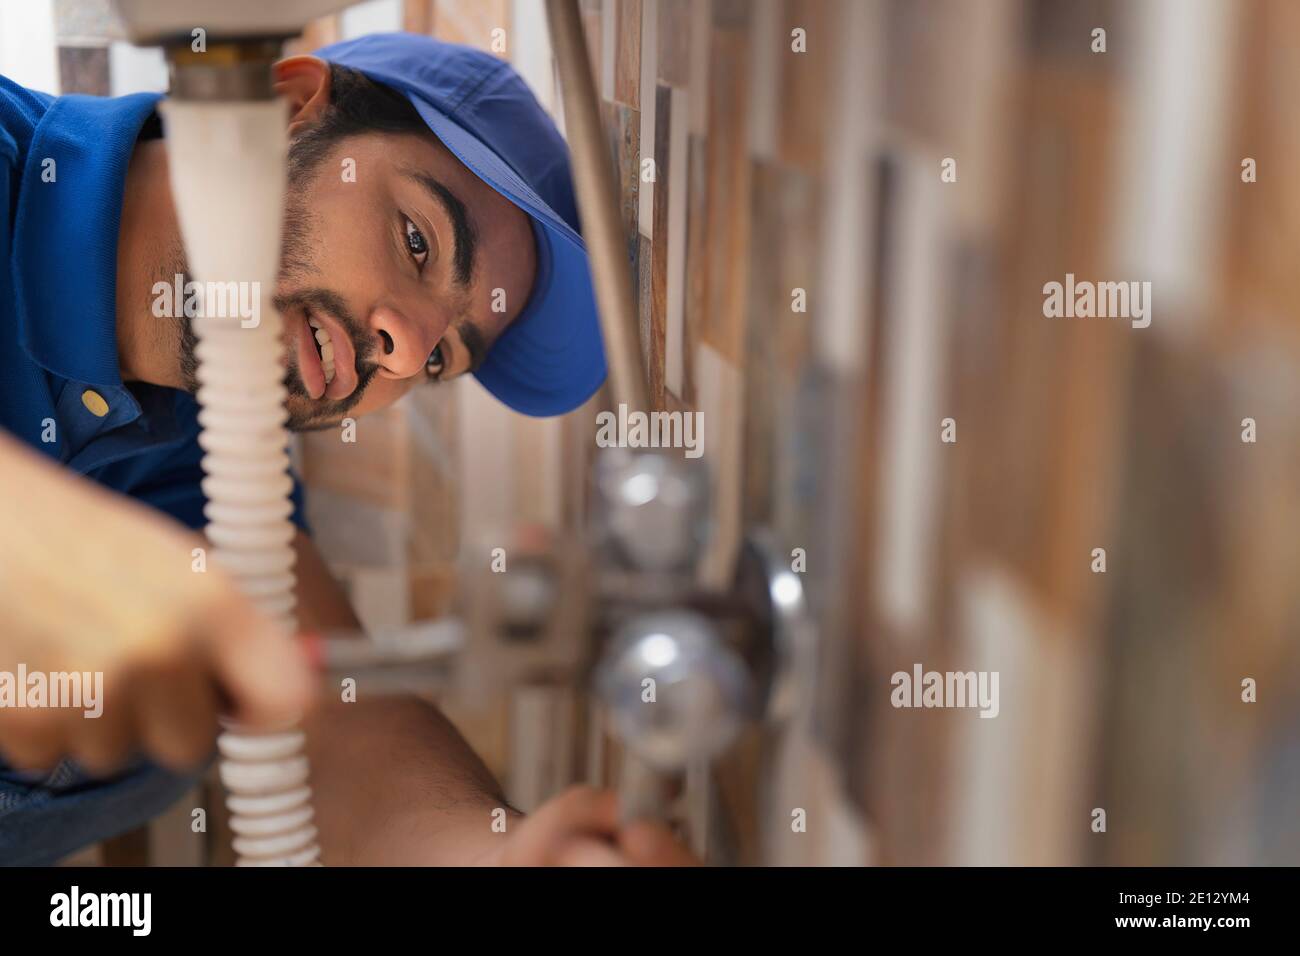 A PLUMBER LEANING DOWN AND FIXING PIPE Stock Photo